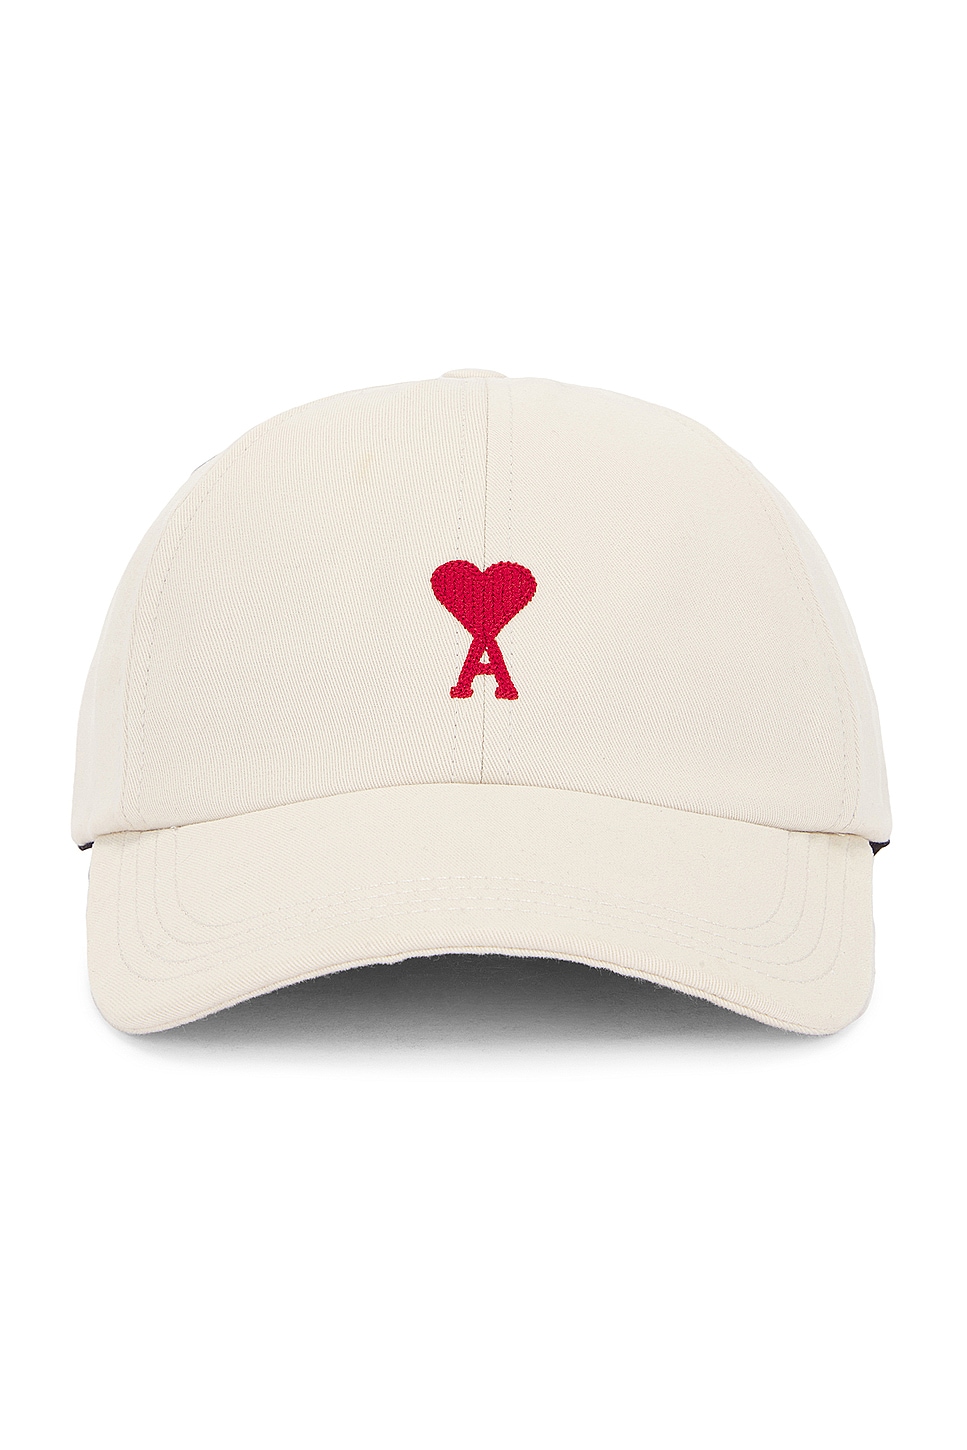 Red ADC Embroidery Cap in Cream